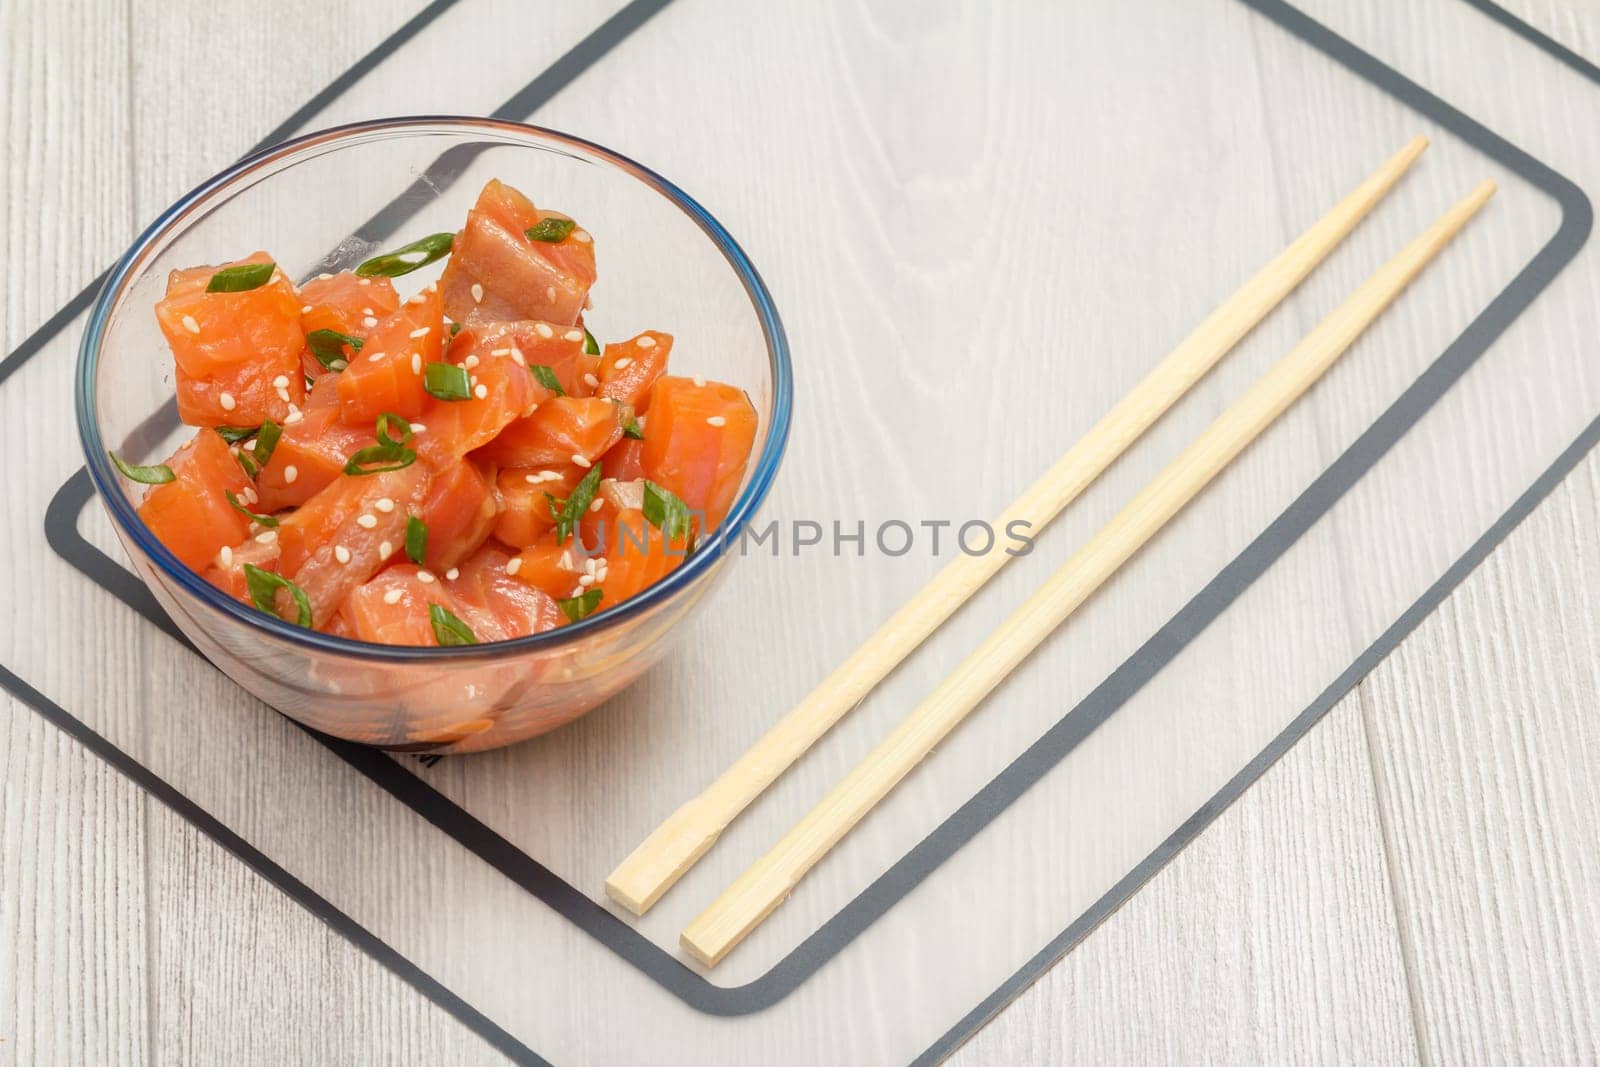 Hawaiian salmon poke with green onions and sesame seeds in glass bowl with chopsticks on wooden background. Top view. Organic seafood.